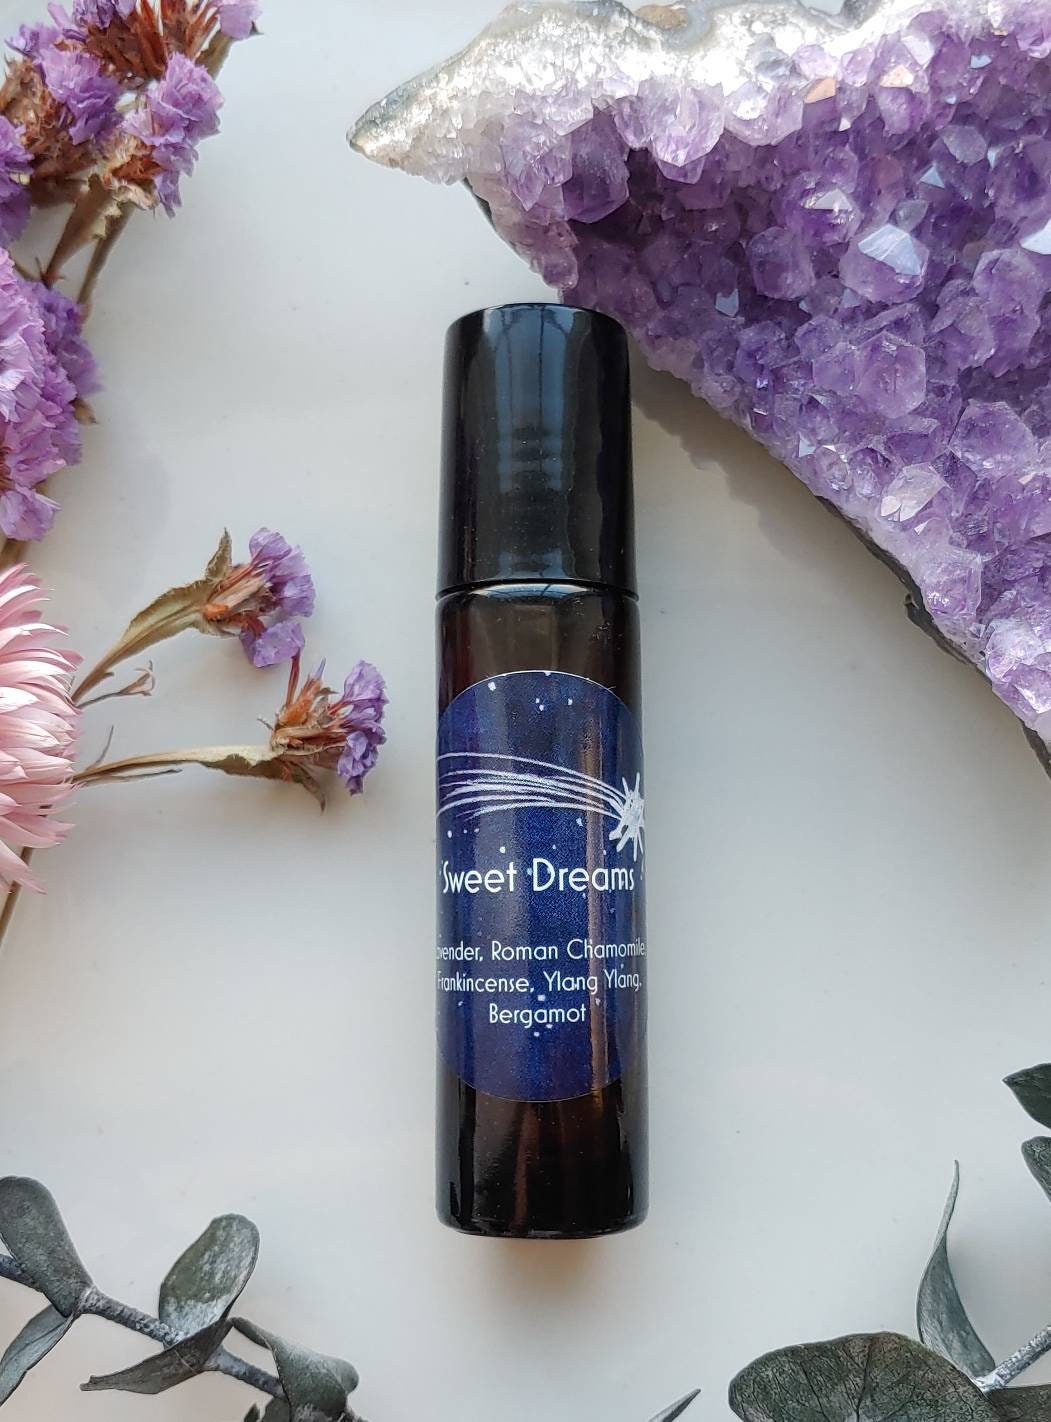 Sleep Well Essential Oil Roller| Blend For Sweet Dreams, Relaxation, Calm + Insomnia Relief| Infused With Amethyst Moonstone